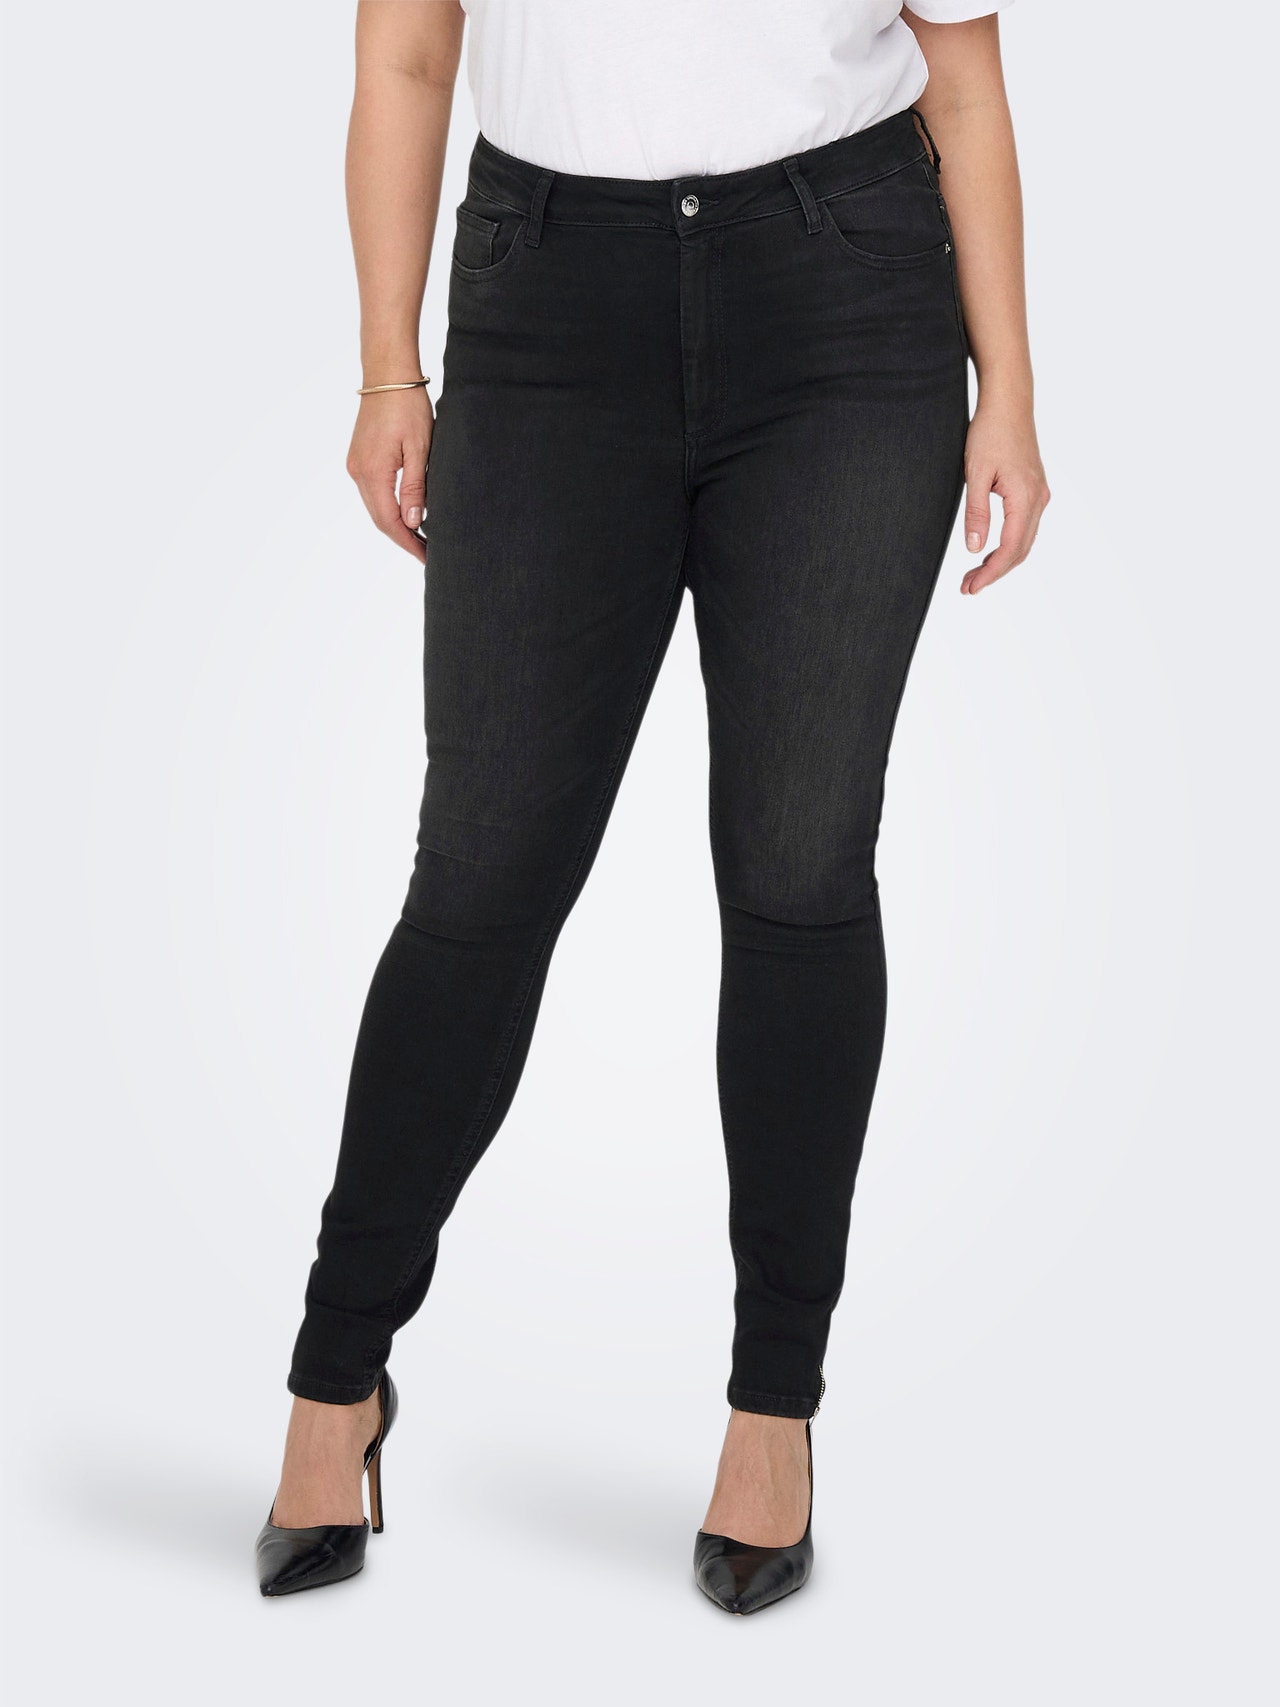 ONLY Jeans Skinny Fit Taille classique -Black Denim - 15280651